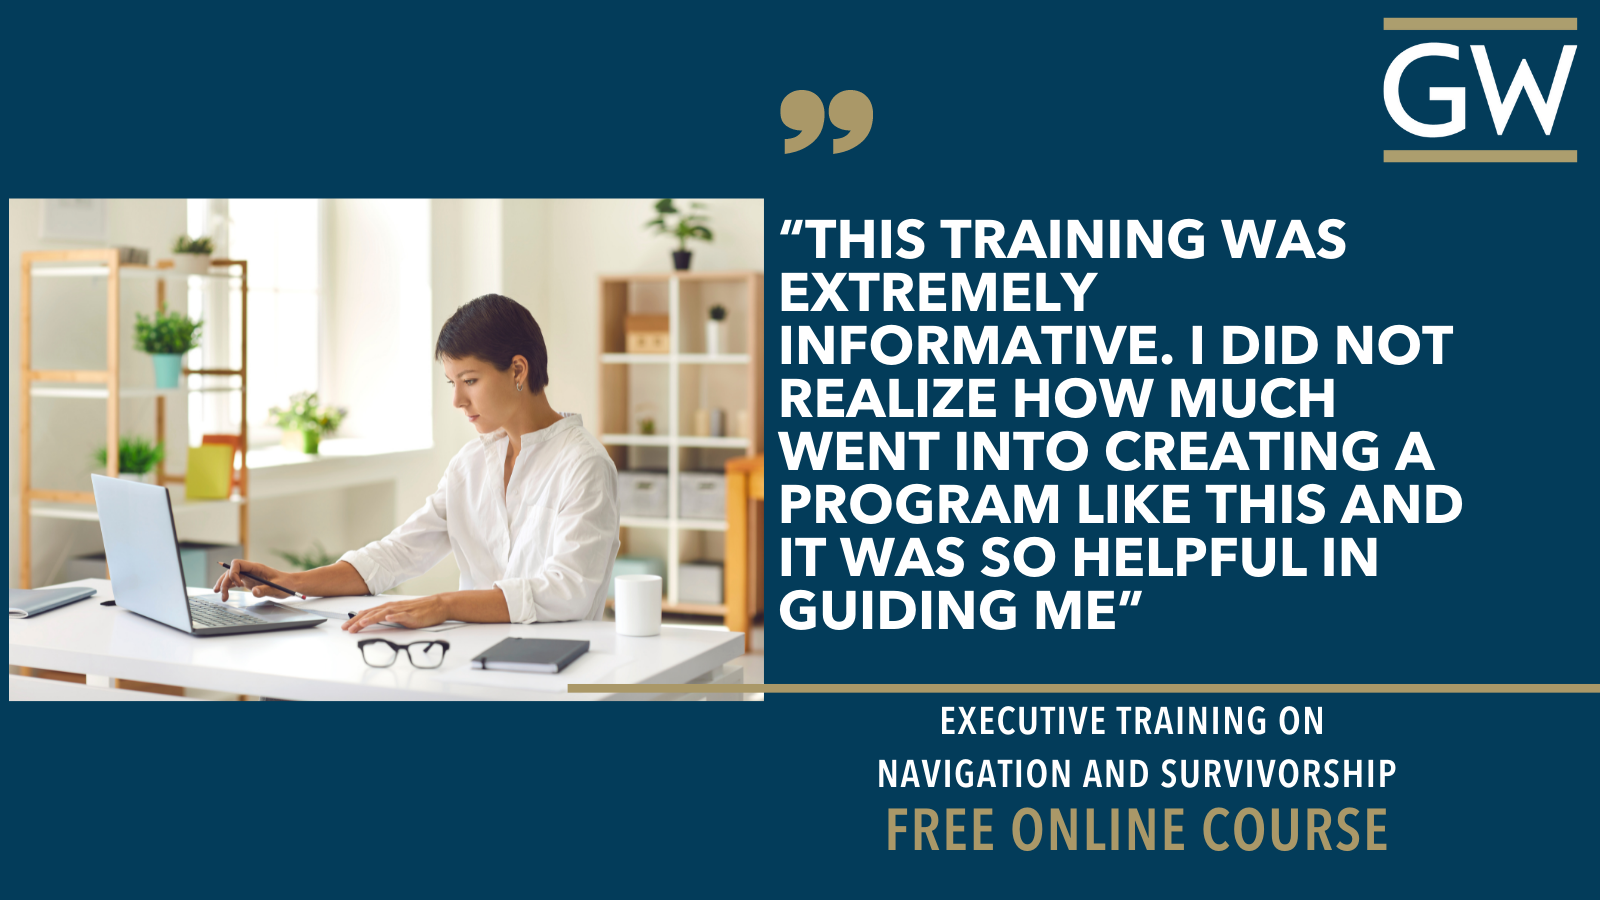 Image of women working in front of laptop. Quote next to image reads "This training was extremely informative. I did not realize how much went into creating a program like this and it was so helpful in guiding me"